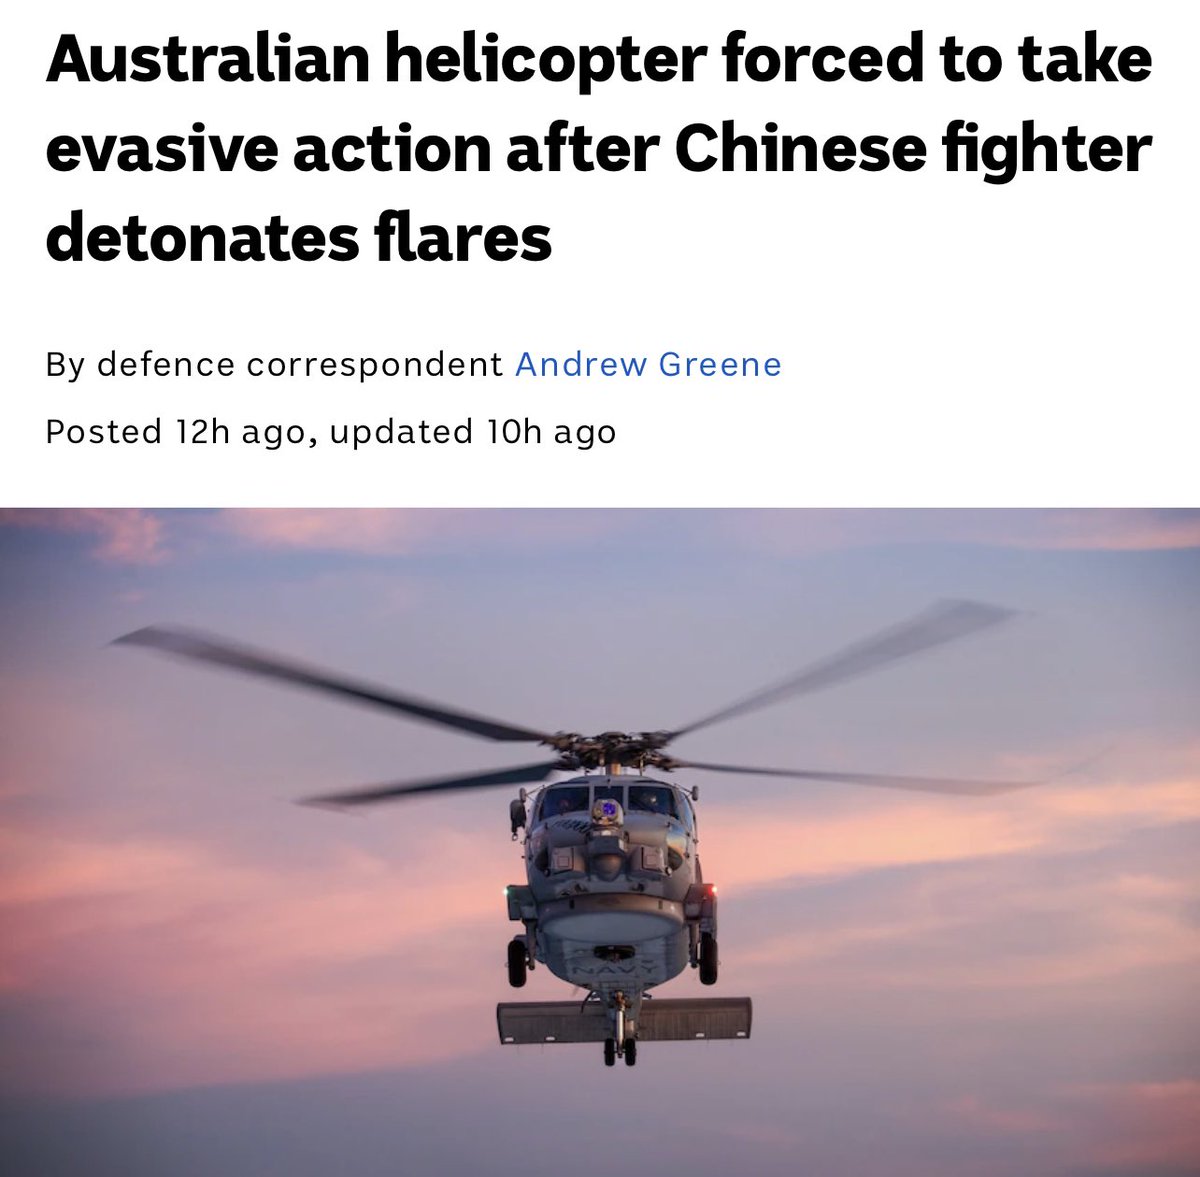 We must condemned the provocative and dangerous interaction from a Chinese jet fighter on a Australian helicopter. I hope the Prime Minister & Defence Minister handle this better then when our navy divers got injured by a Chinese warship.